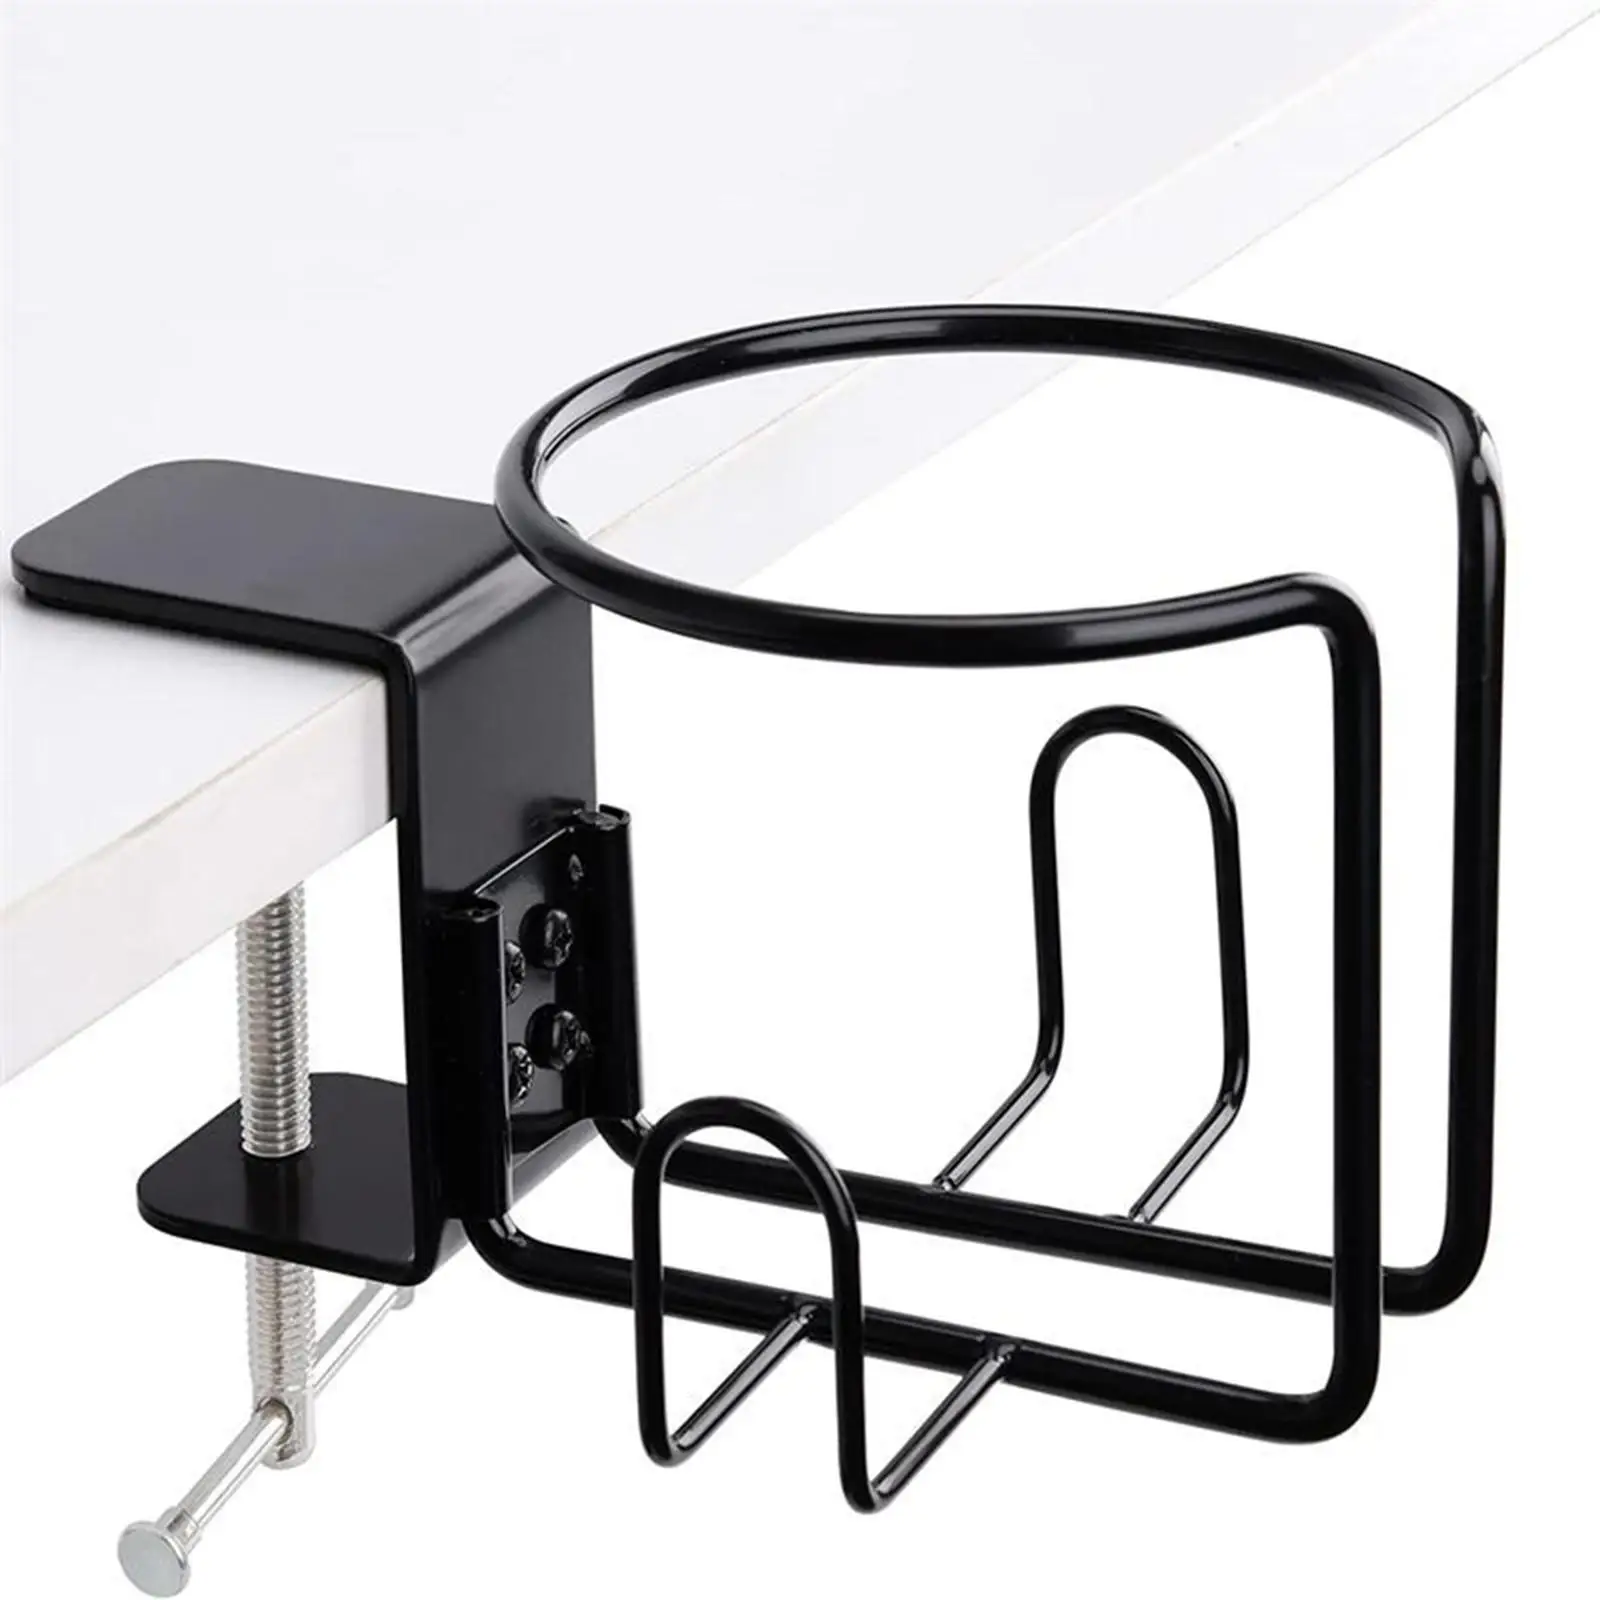 Anti Spill Cup Holder Metal Office Supplies Home Desk Accessories Horizontal or Vertical Mounts Water Bottle Holder